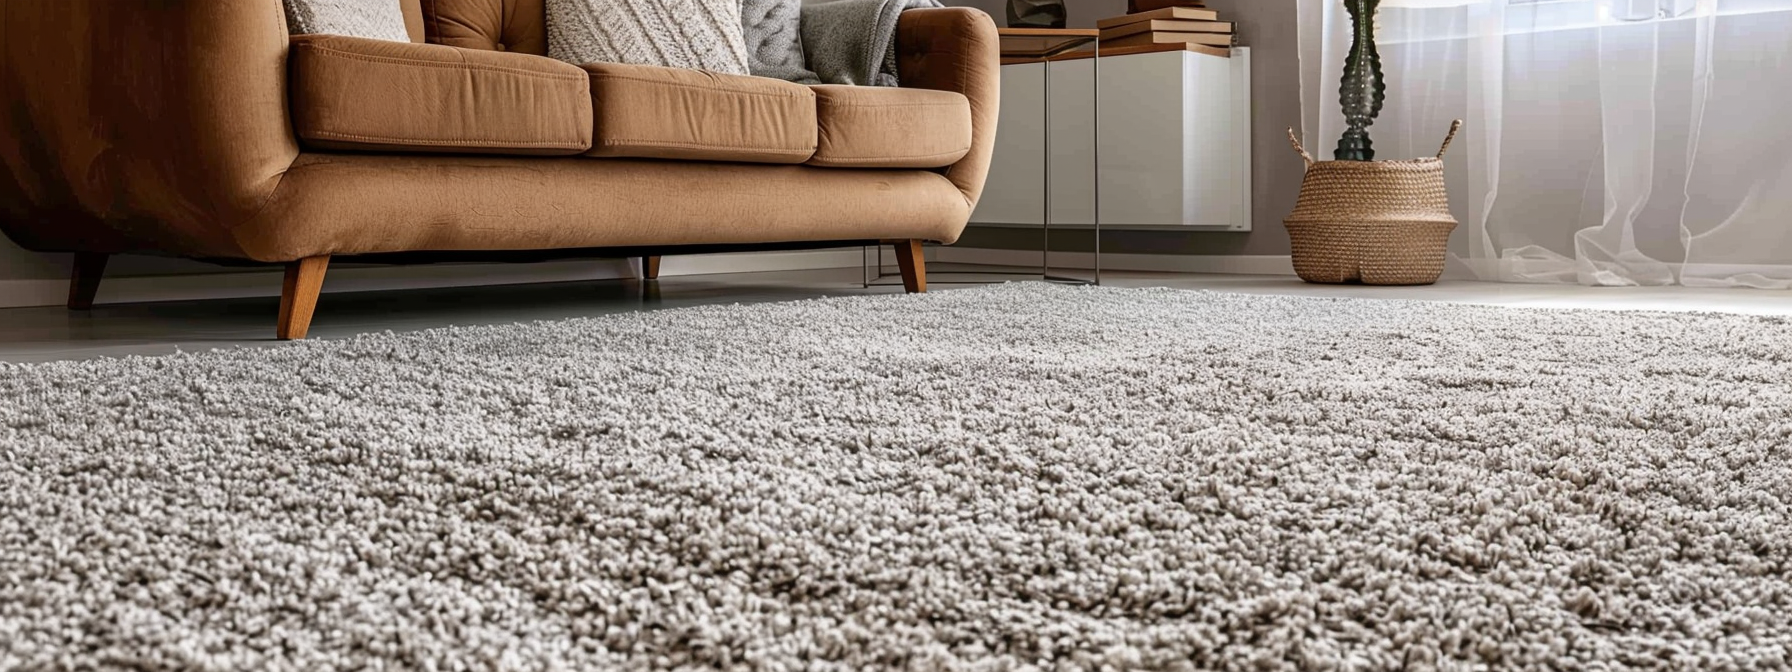 Seasonal Carpet Care Strategies: Adapting Your Routine for the Changing Weather